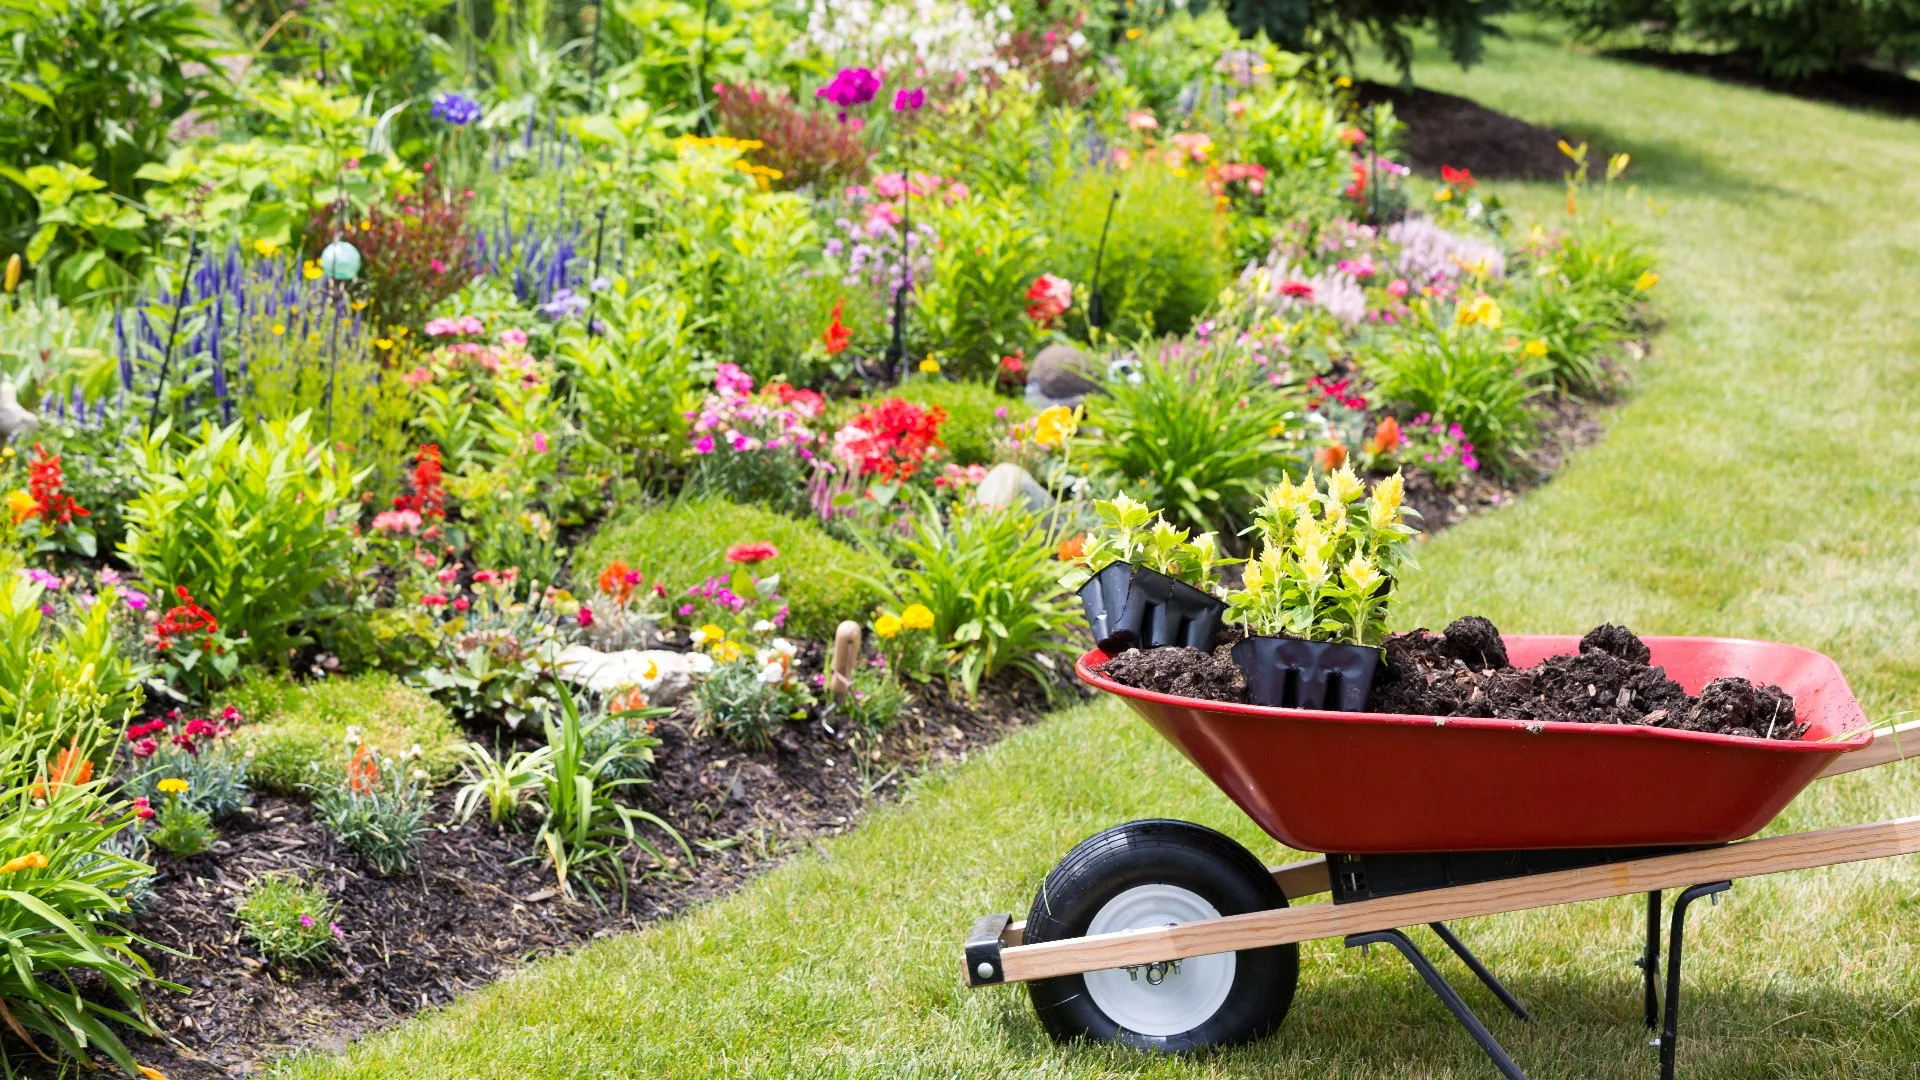 4 Warm-Season Annuals to Consider Adding to Your Landscape Beds